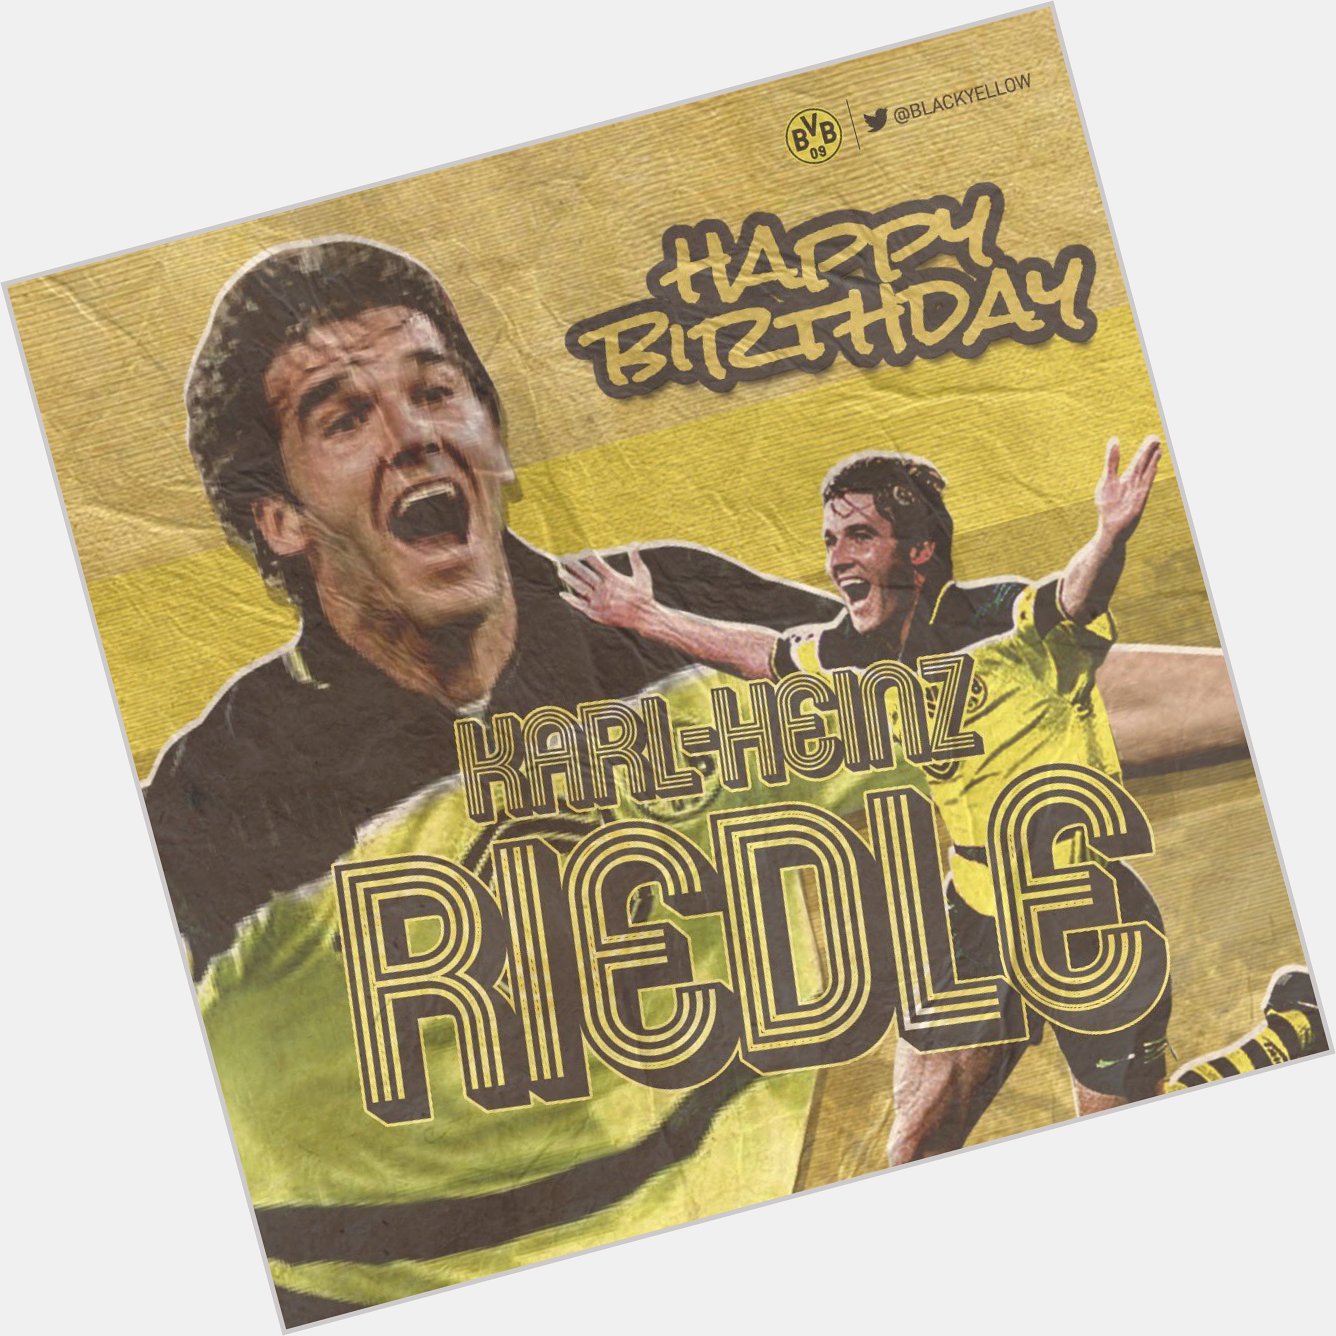 Happy 54th Birthday to BVB legend and Champions League hero, Karl-Heinz Riedle!  